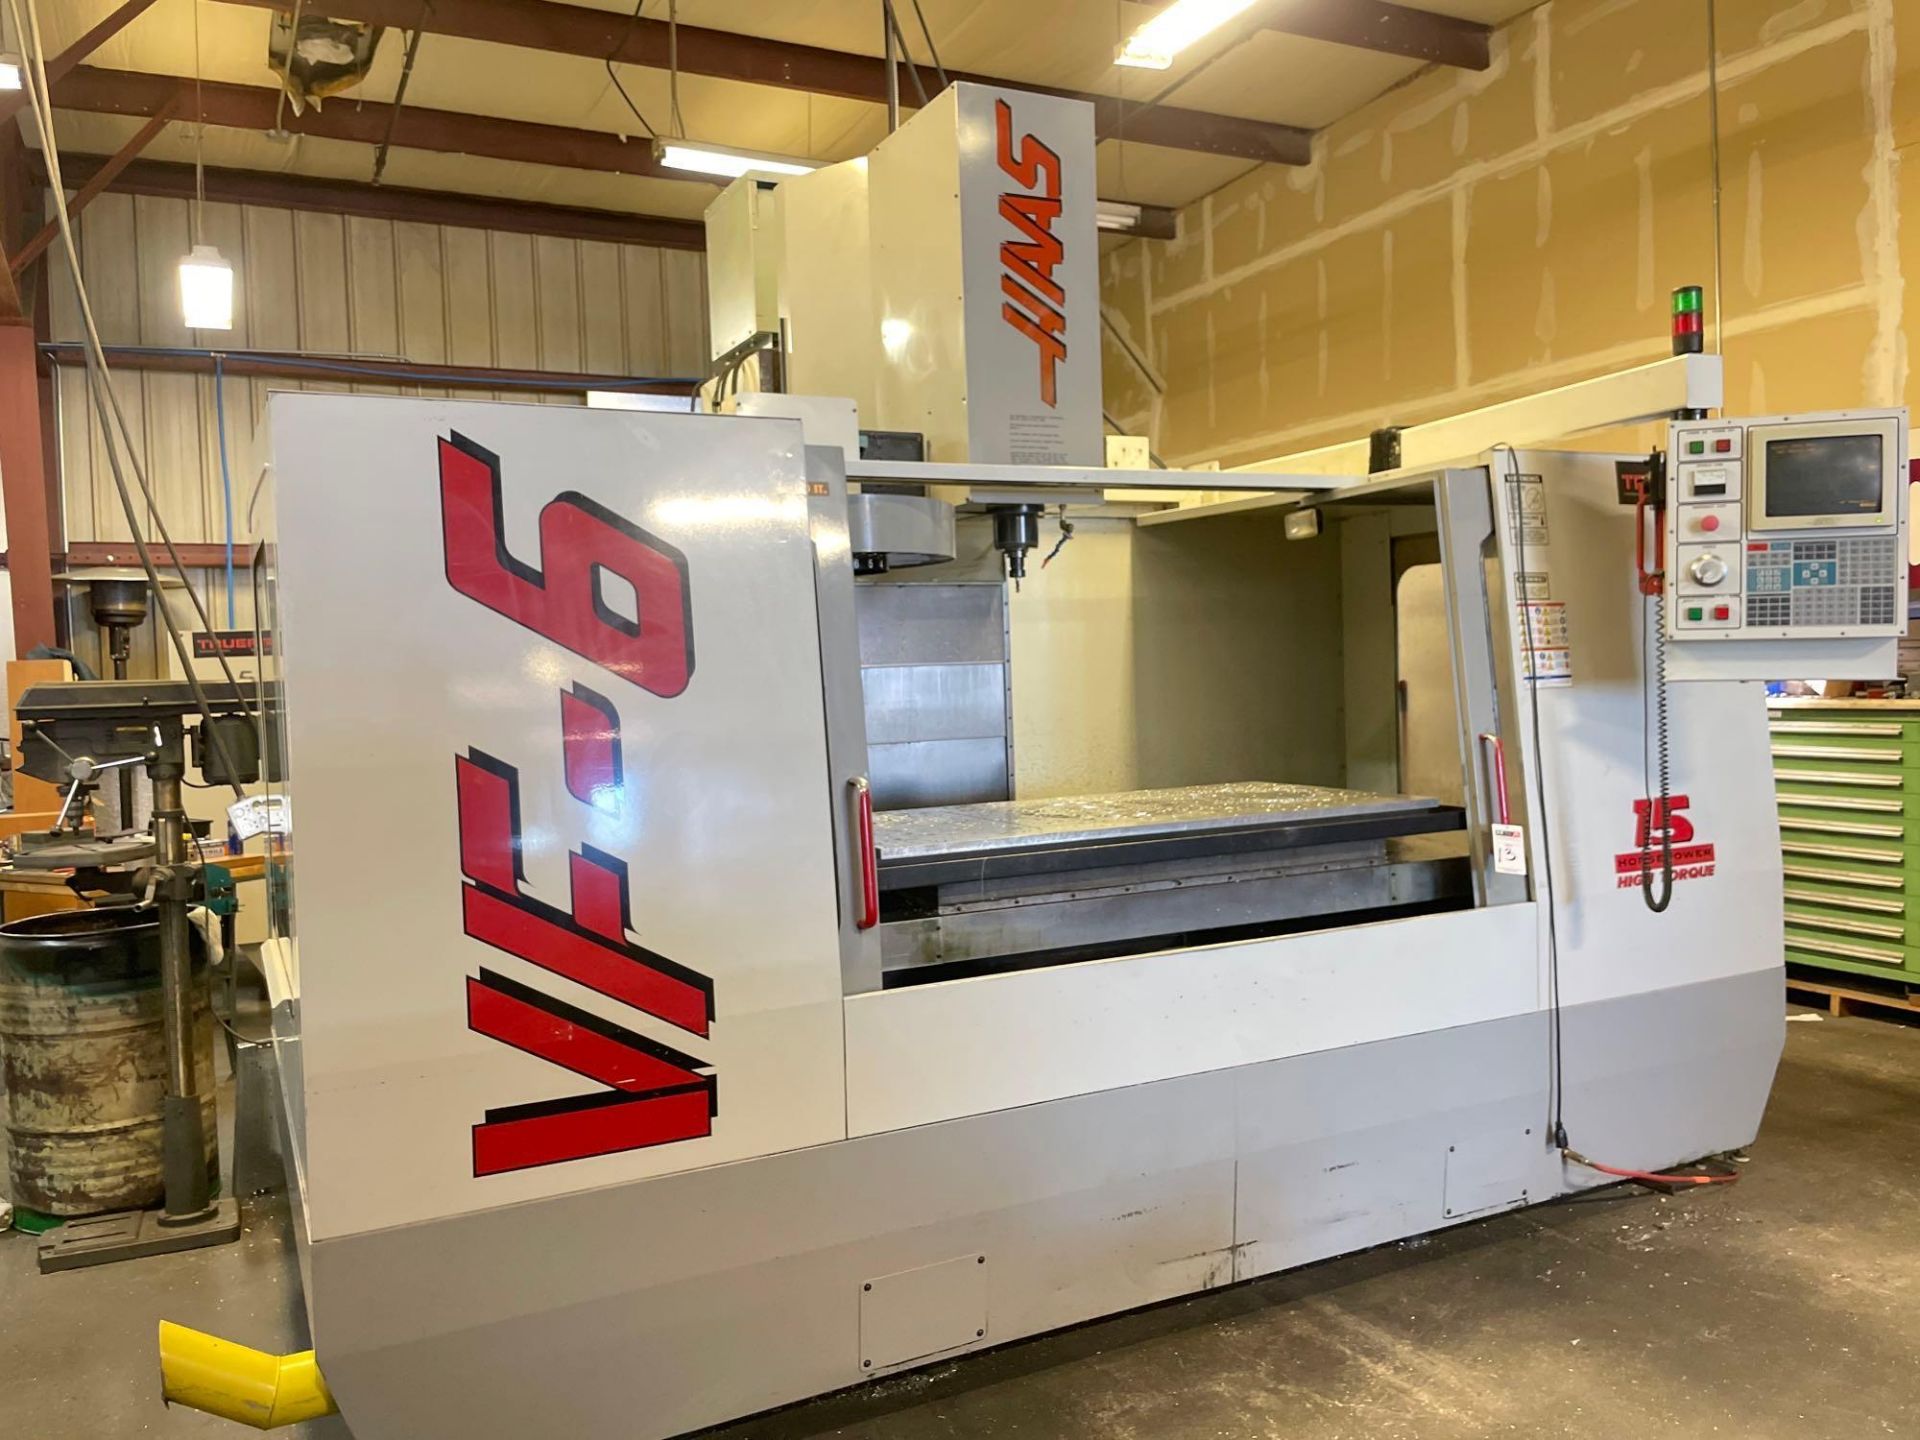 Haas VF-6 4-Axis Ready Vertical Machining Center, 64” x 32” x 30” Trvls., CT40, 20 ATC, New 1997 - Image 4 of 10